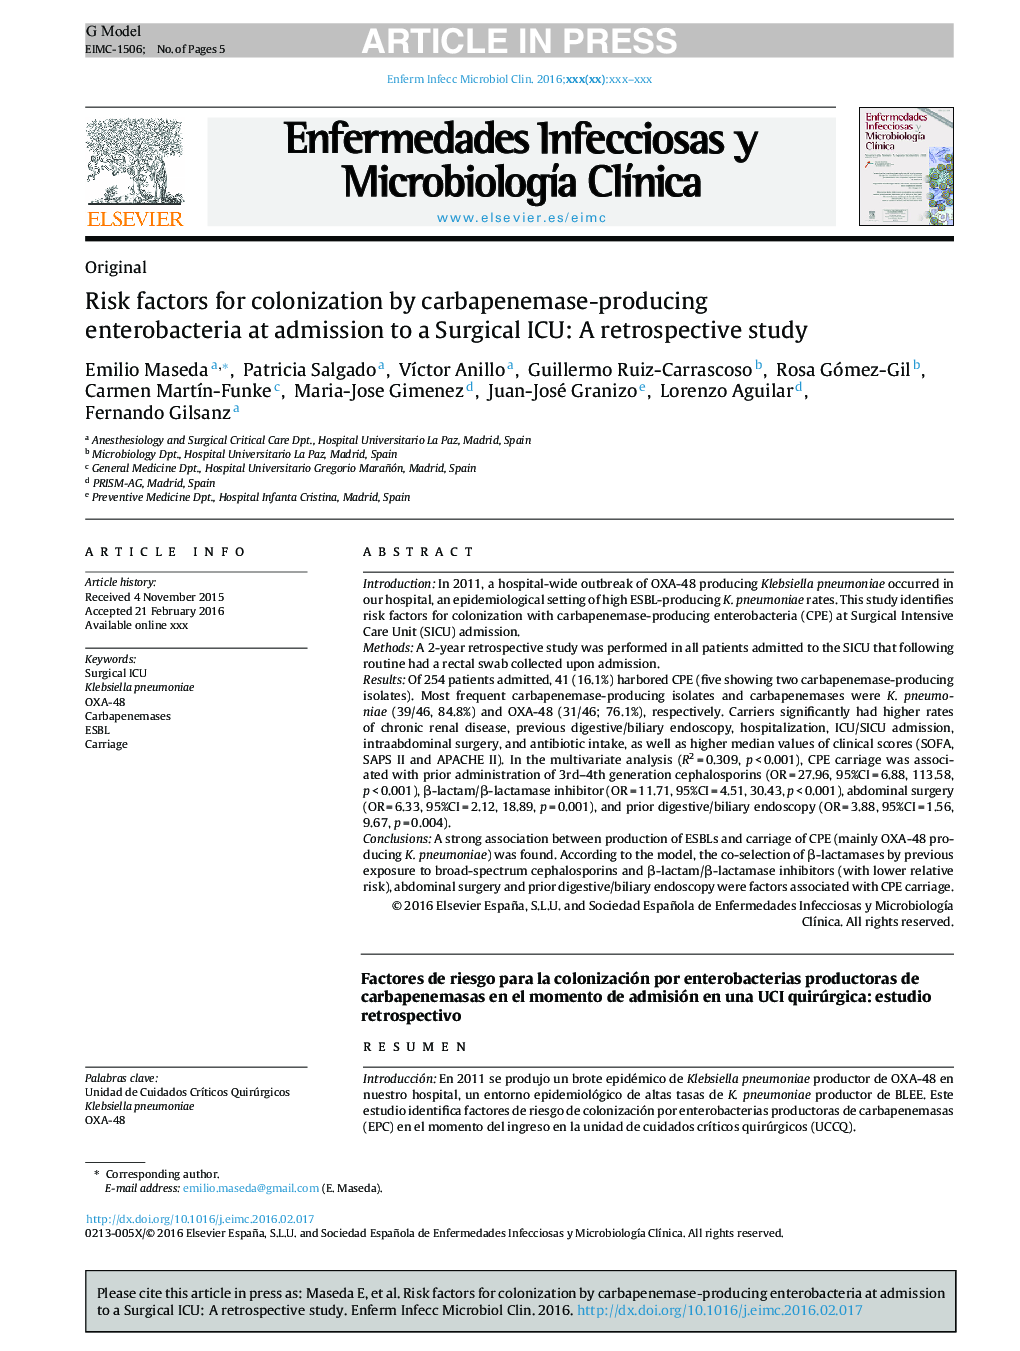 Risk factors for colonization by carbapenemase-producing enterobacteria at admission to a Surgical ICU: A retrospective study